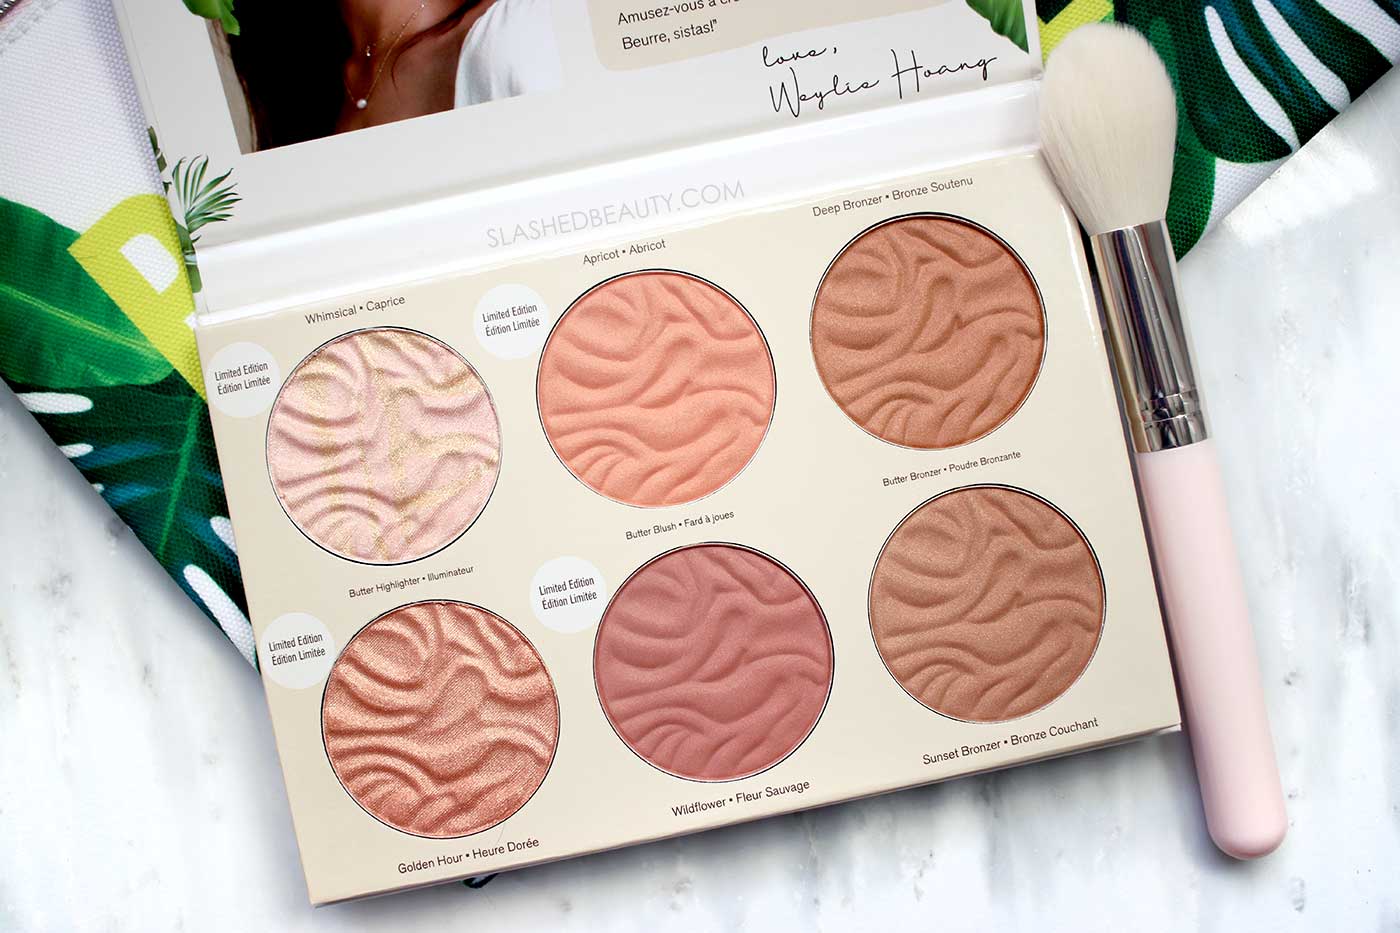 Physicians Formula Butter Collection x Weylie Hoang Palette Review & Swatches | Slashed Beauty